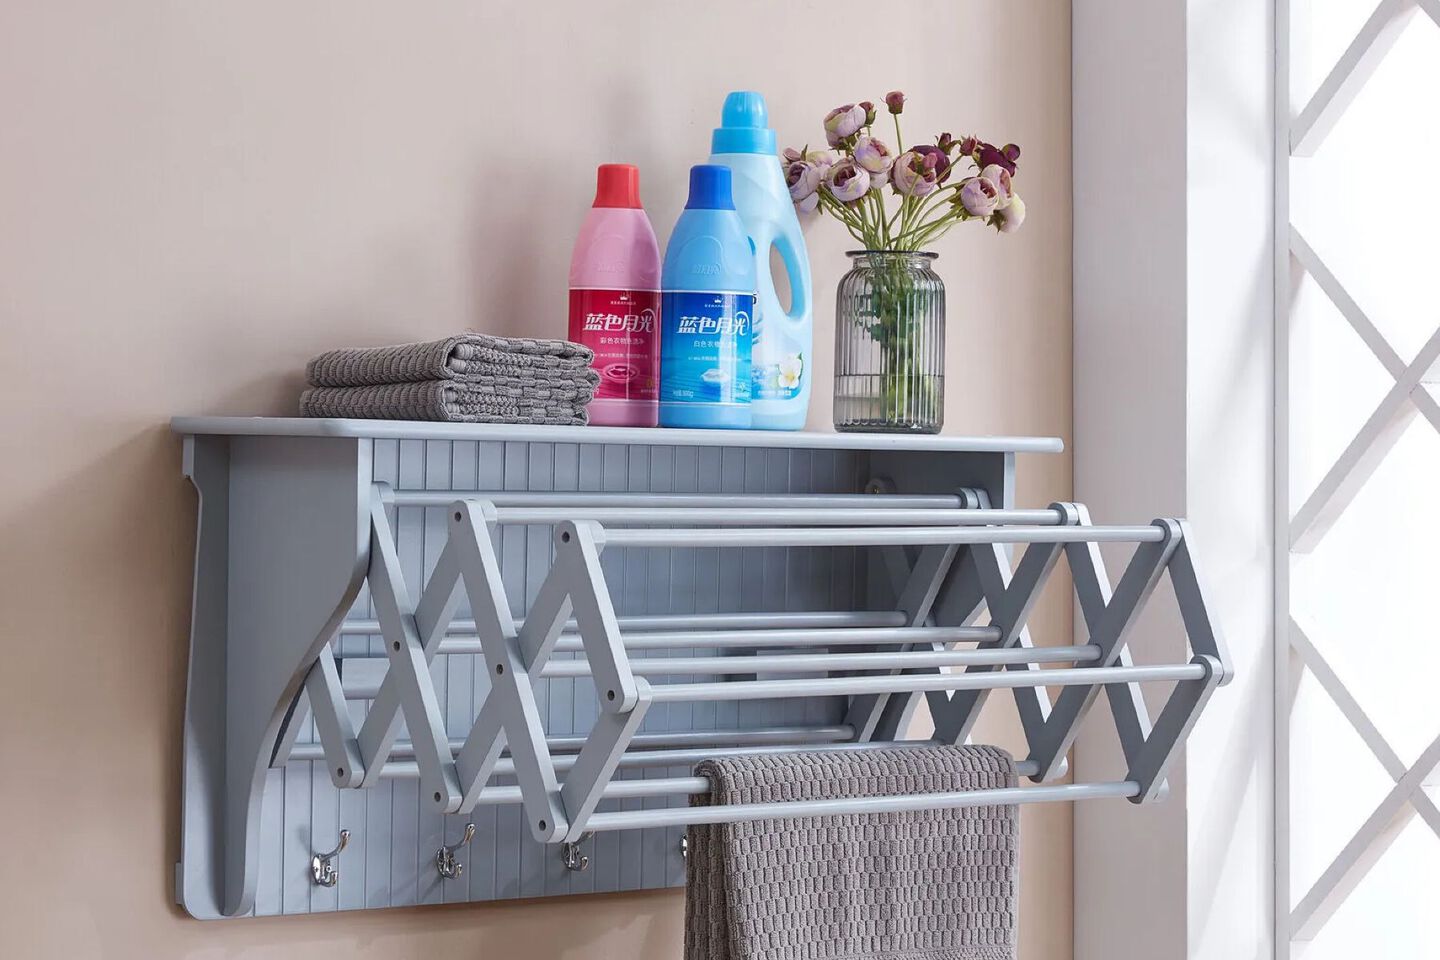 Grey wall shelf with cleaning supplies, towels, and a vase on top